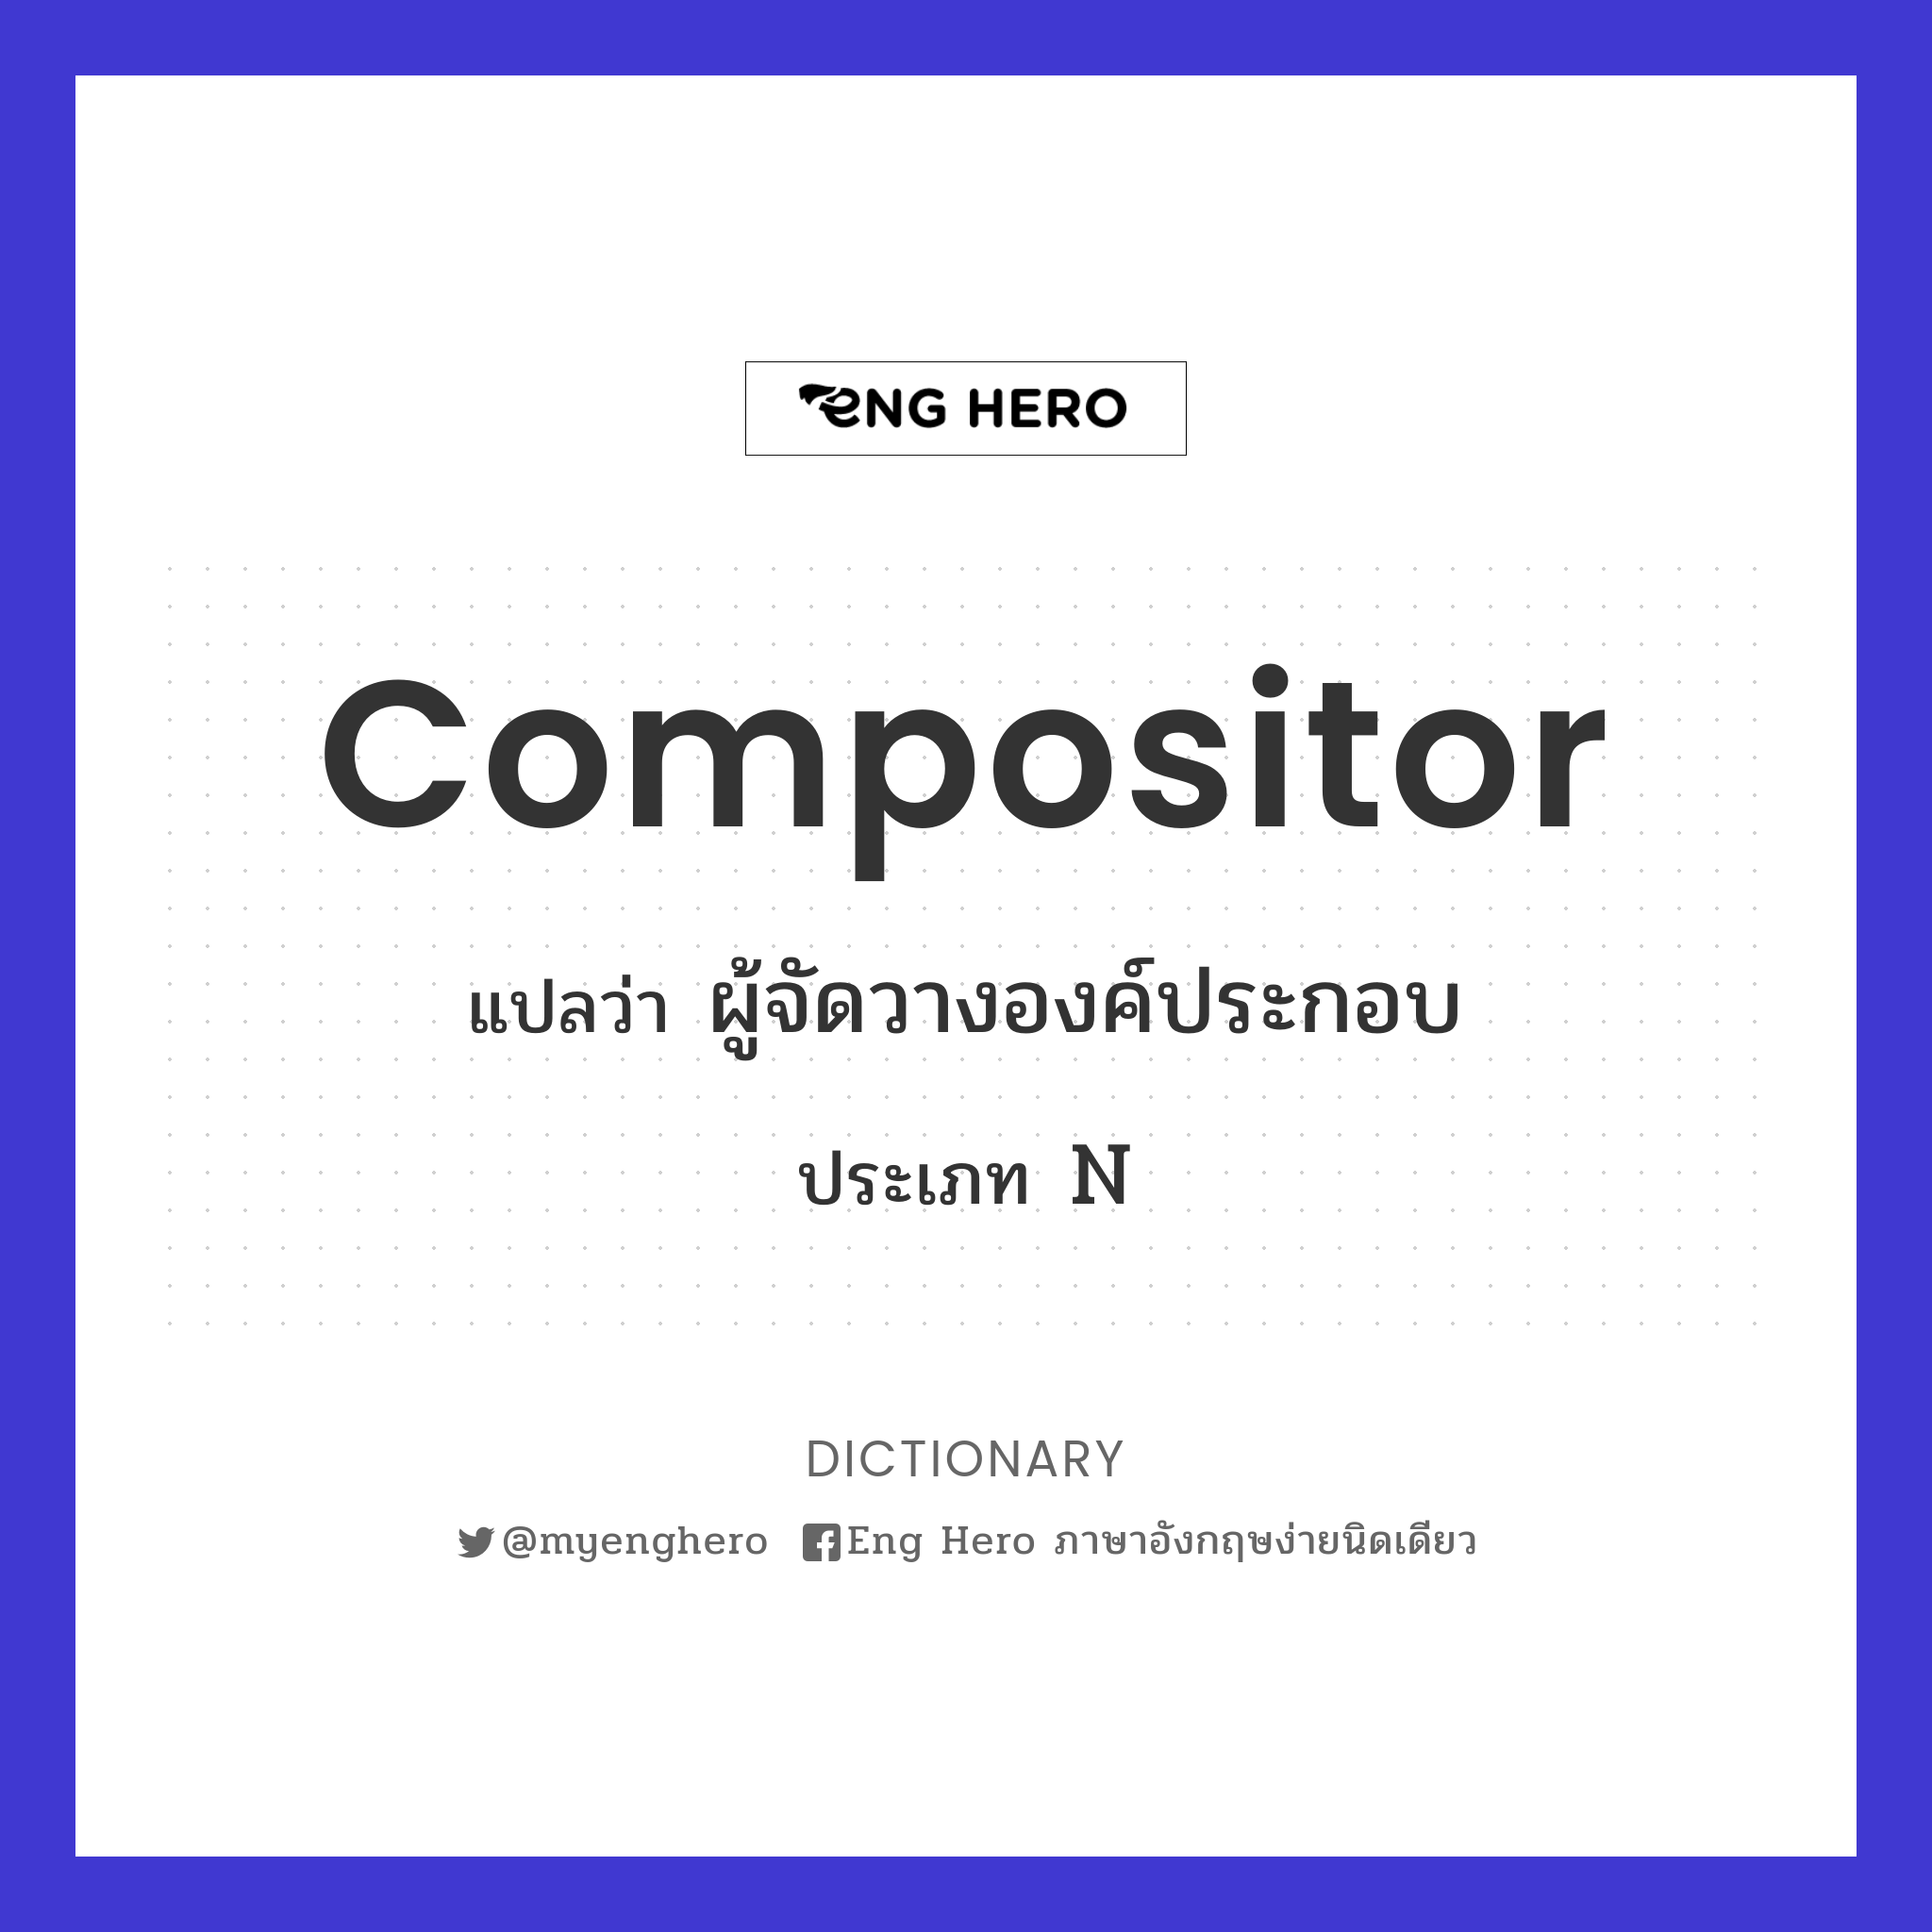 compositor